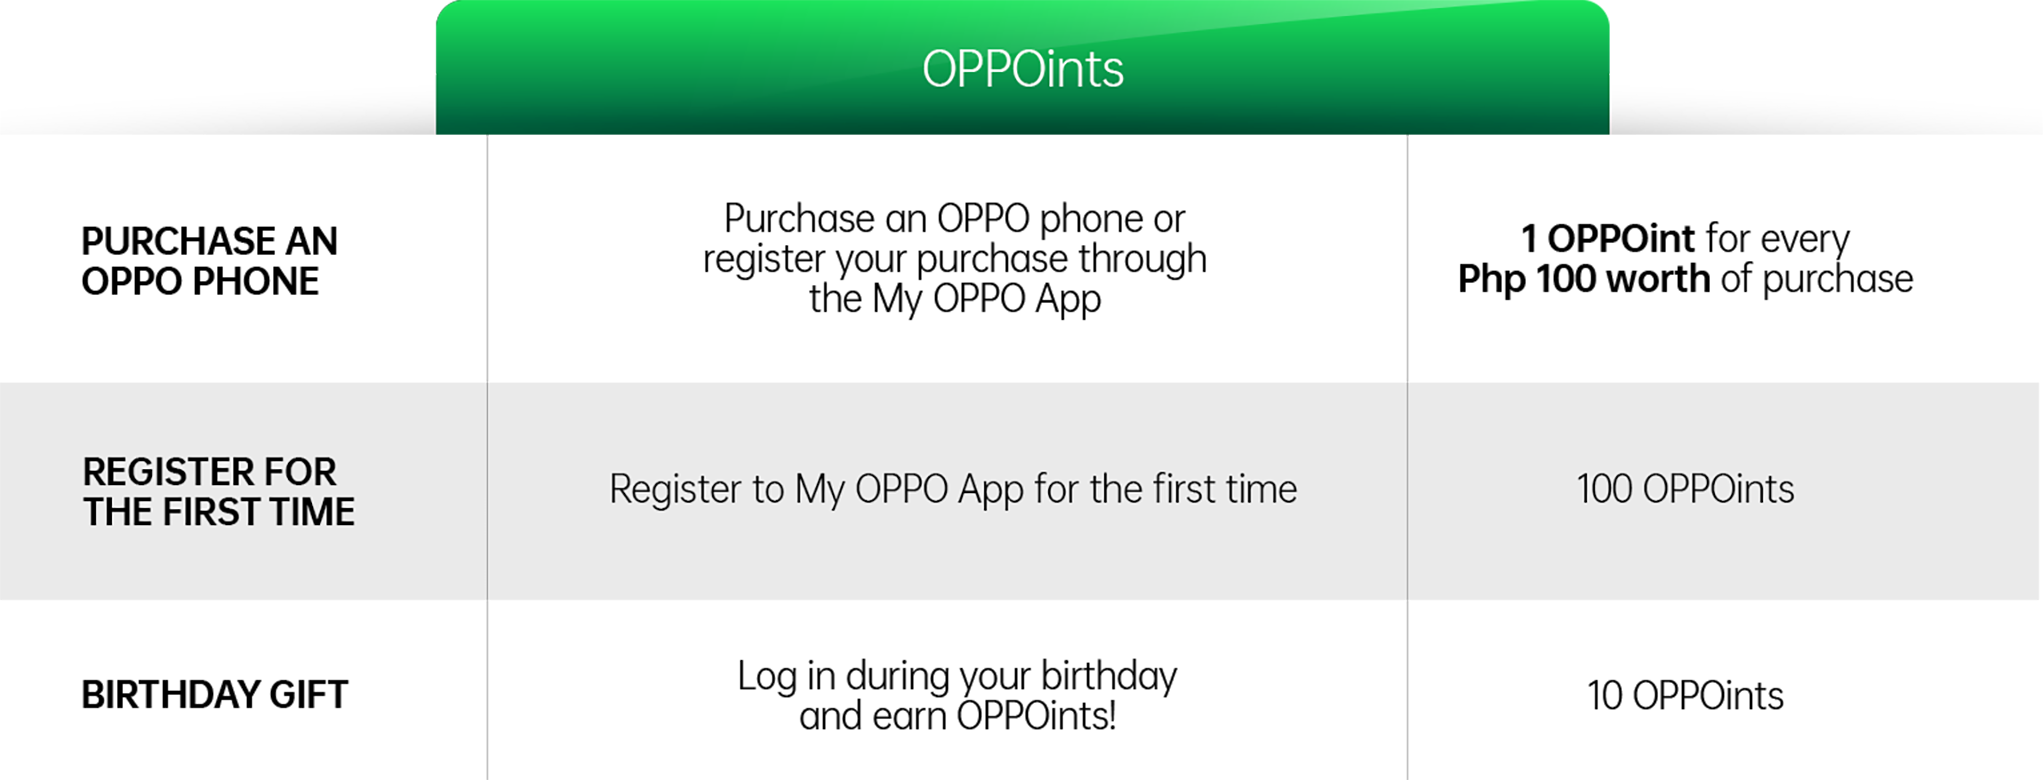 How to acquire OPPOints